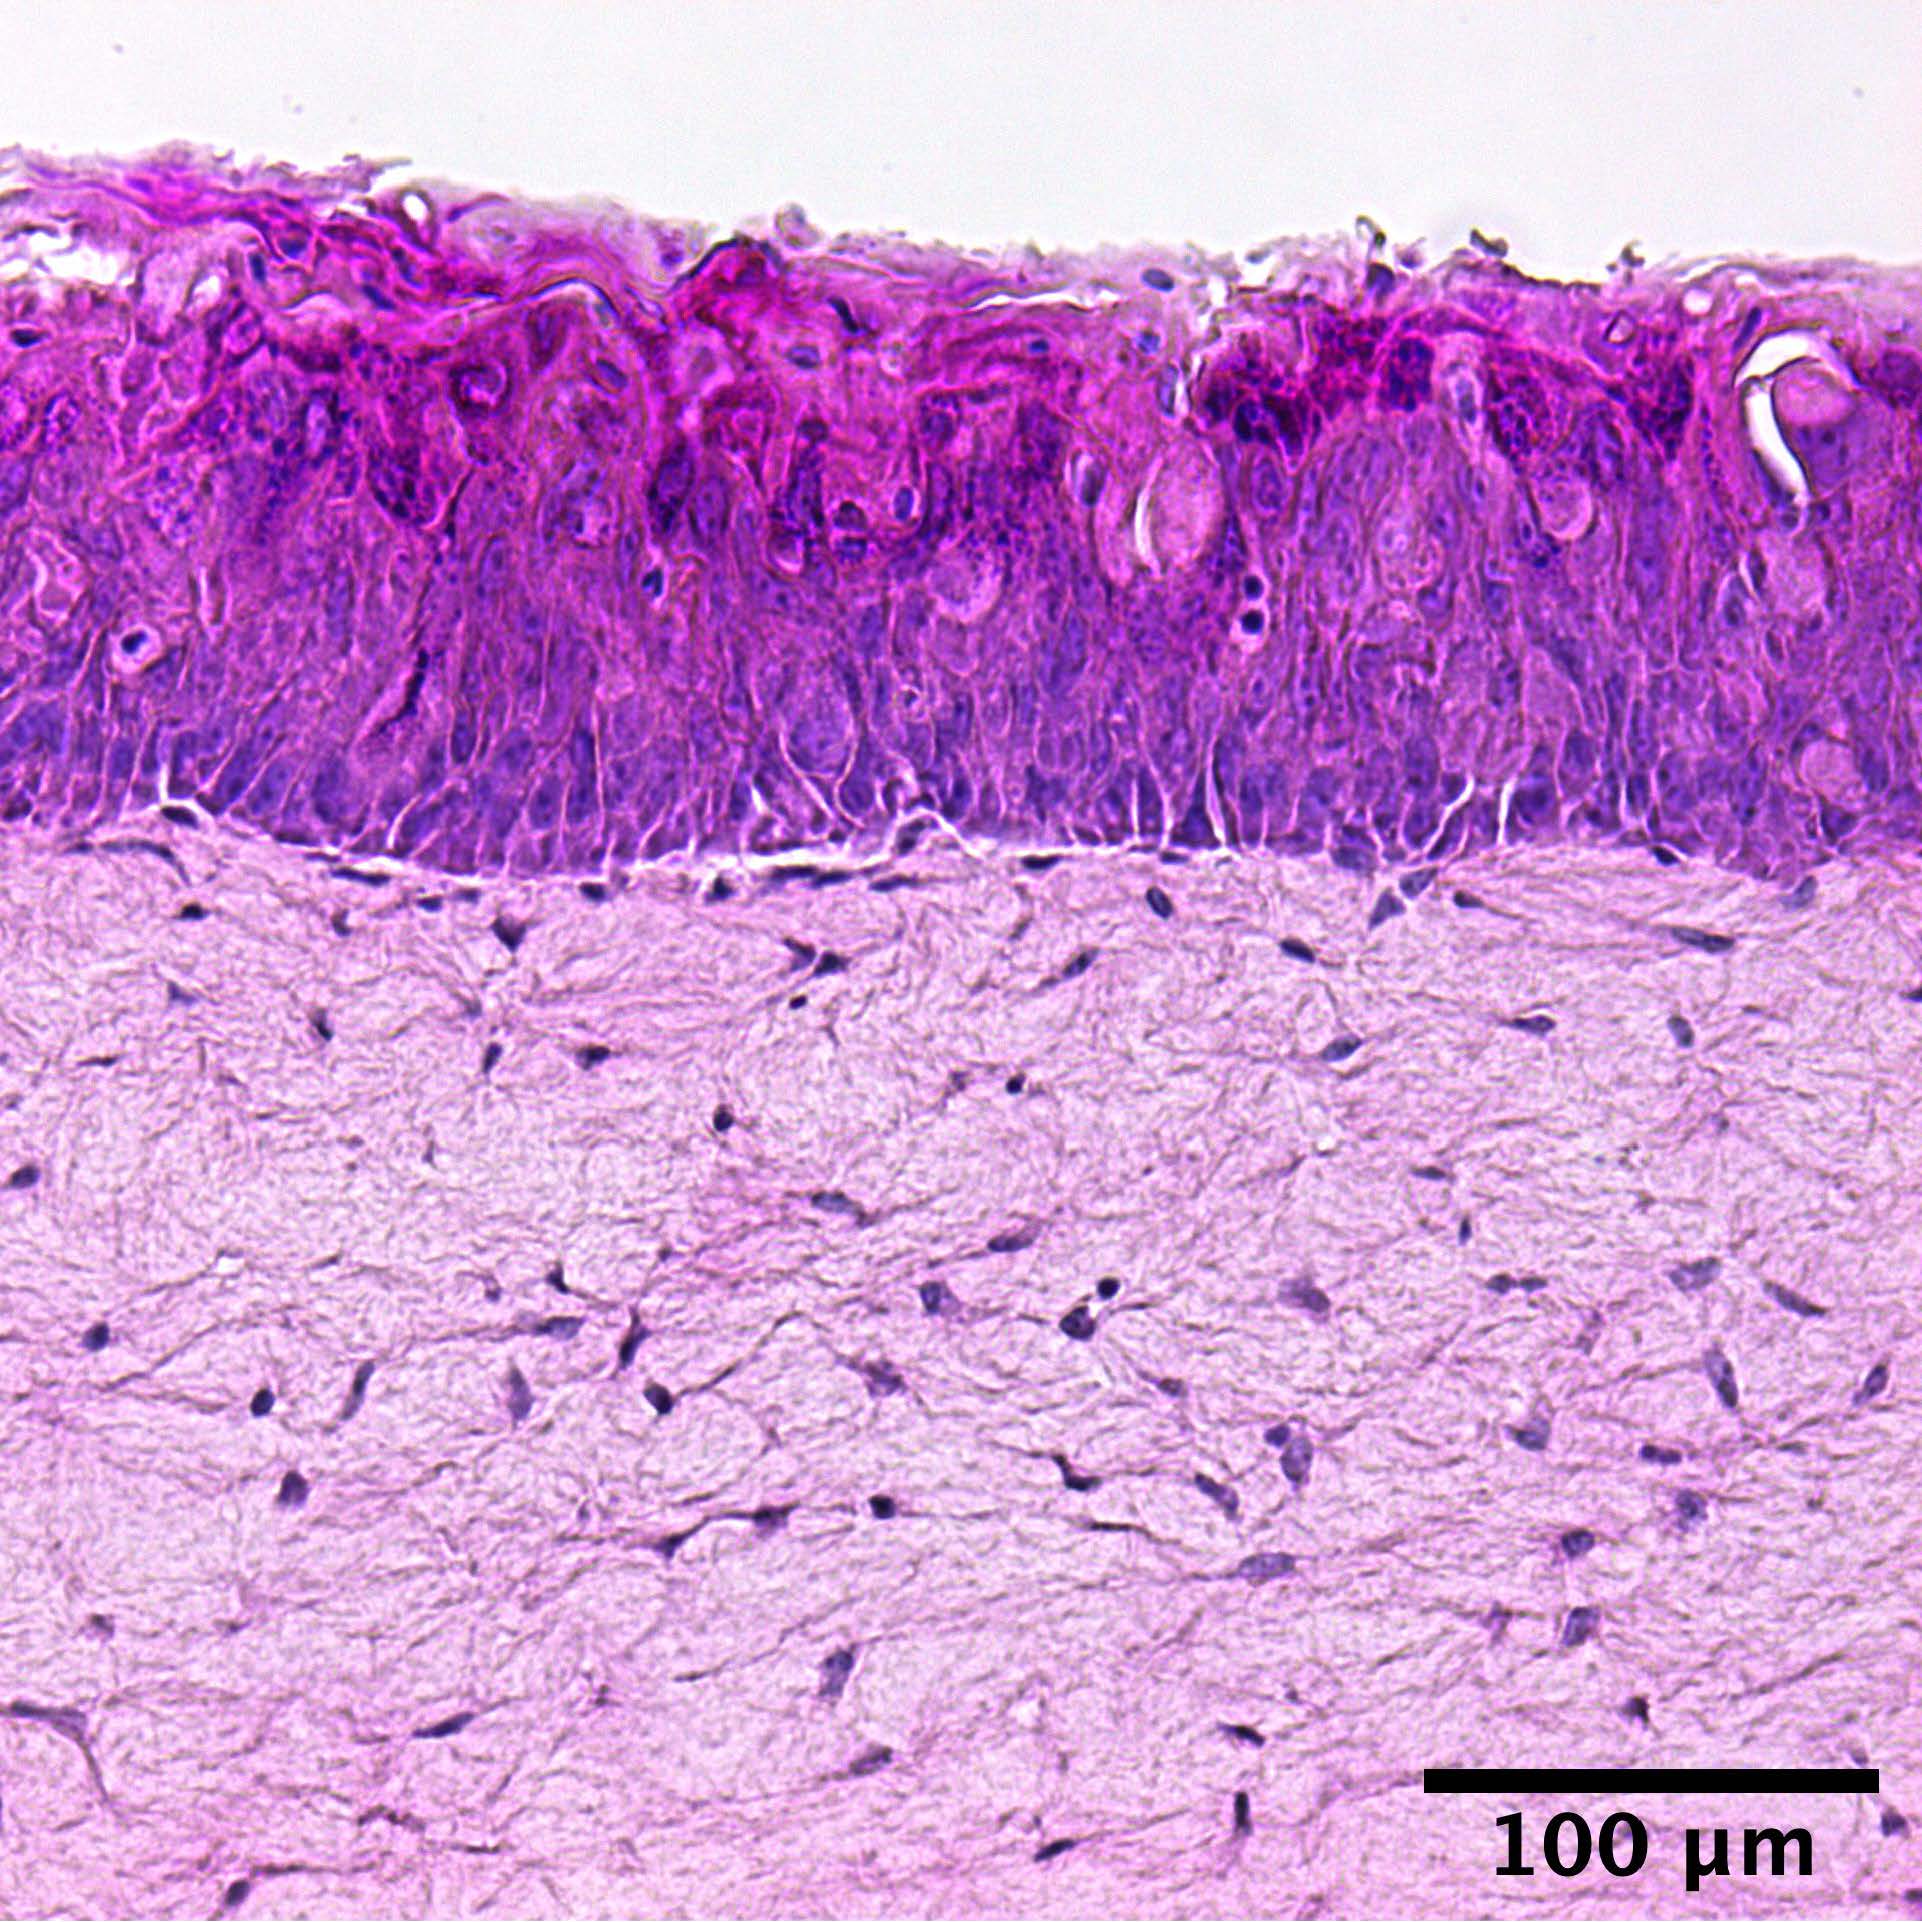 Hematoxylin & eosin staining of a tissue engineered skin model mimicking the epidermal and dermal layer of native skin.